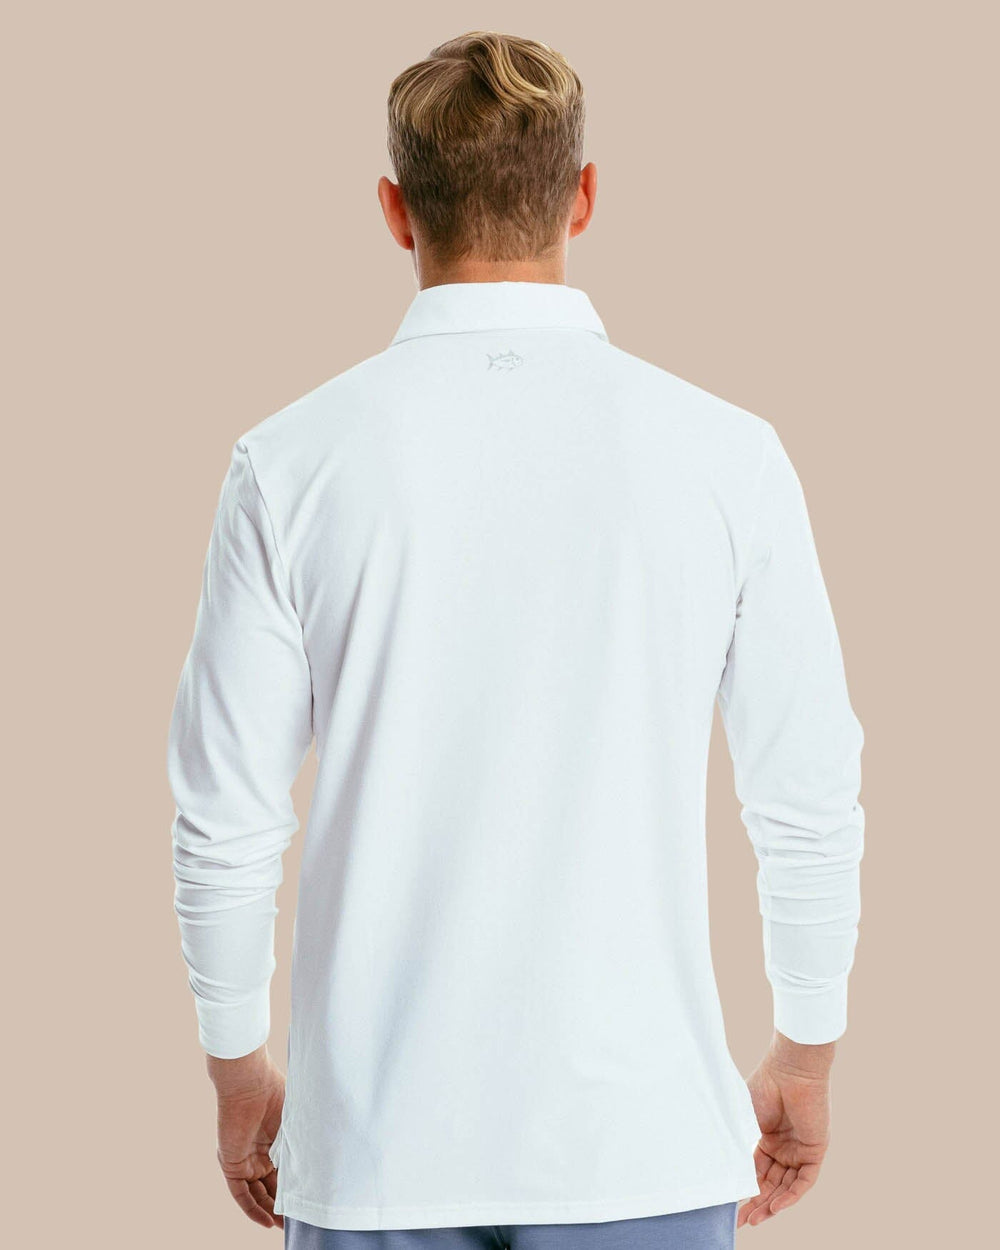 The back of the Men's Ryder Long Sleeve Performance Polo Shirt by Southern Tide - Classic White